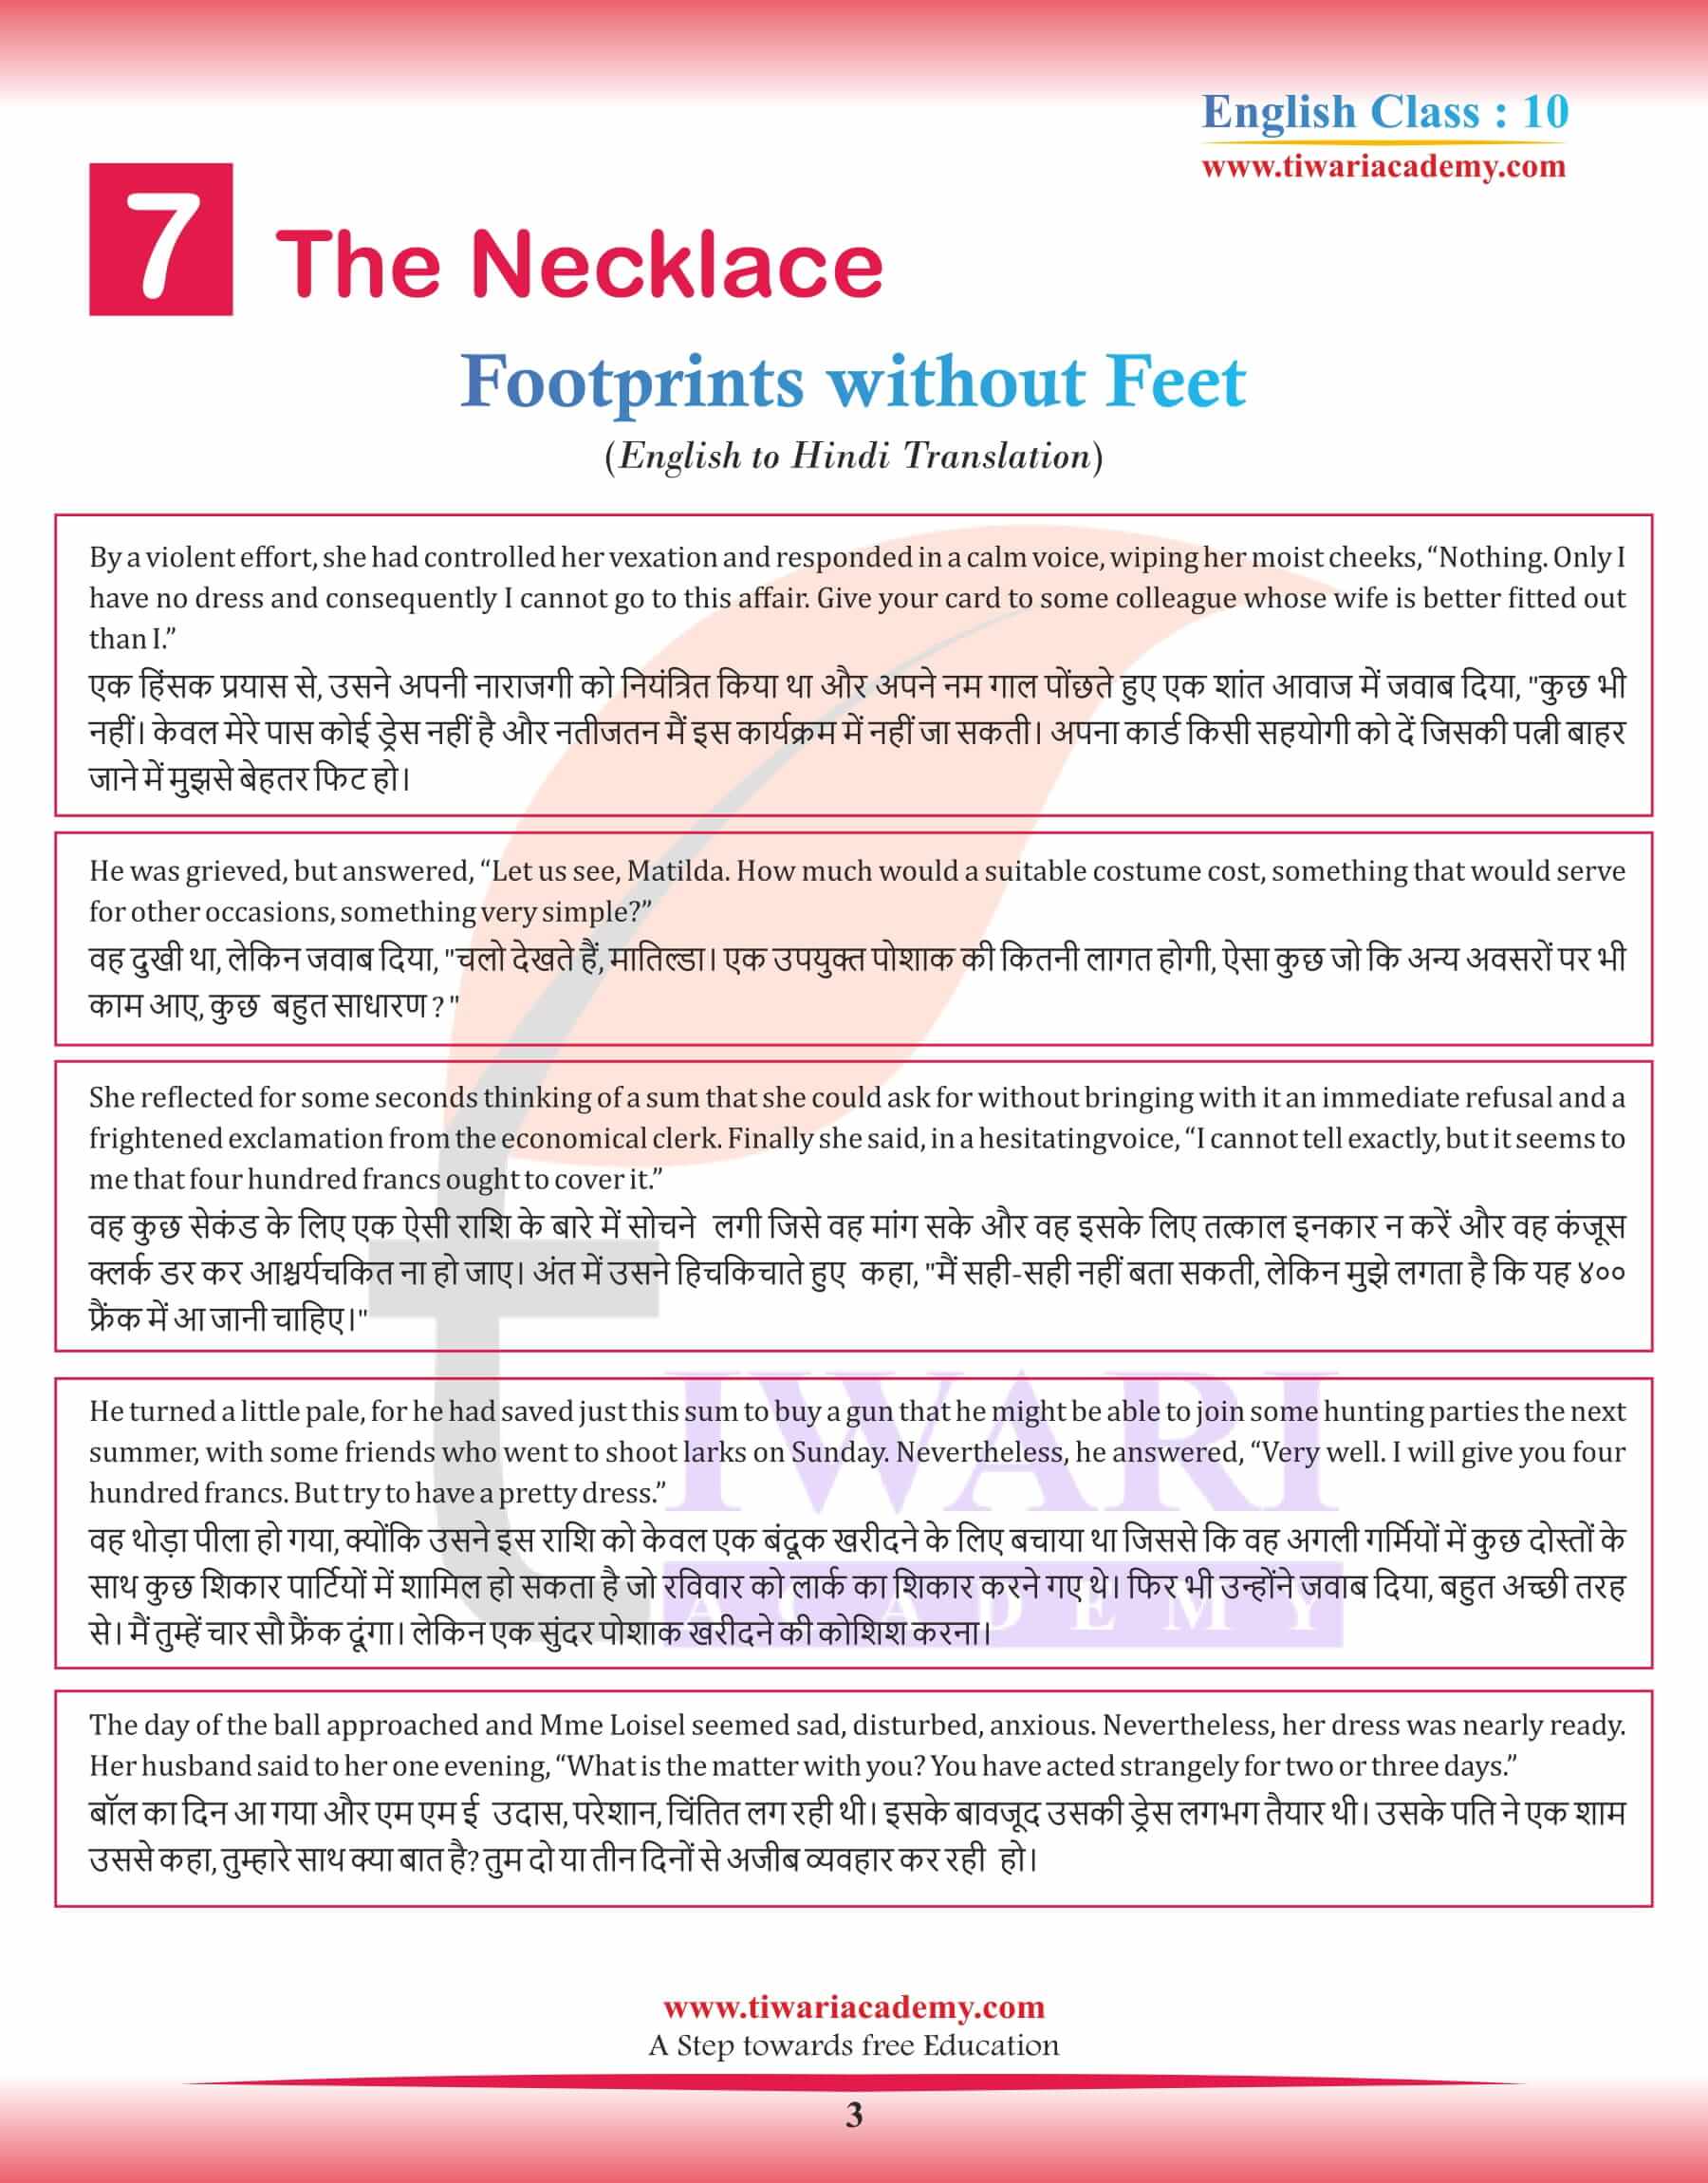 Class 10 English Supplementary Chapter 7 the Necklace in Hindi